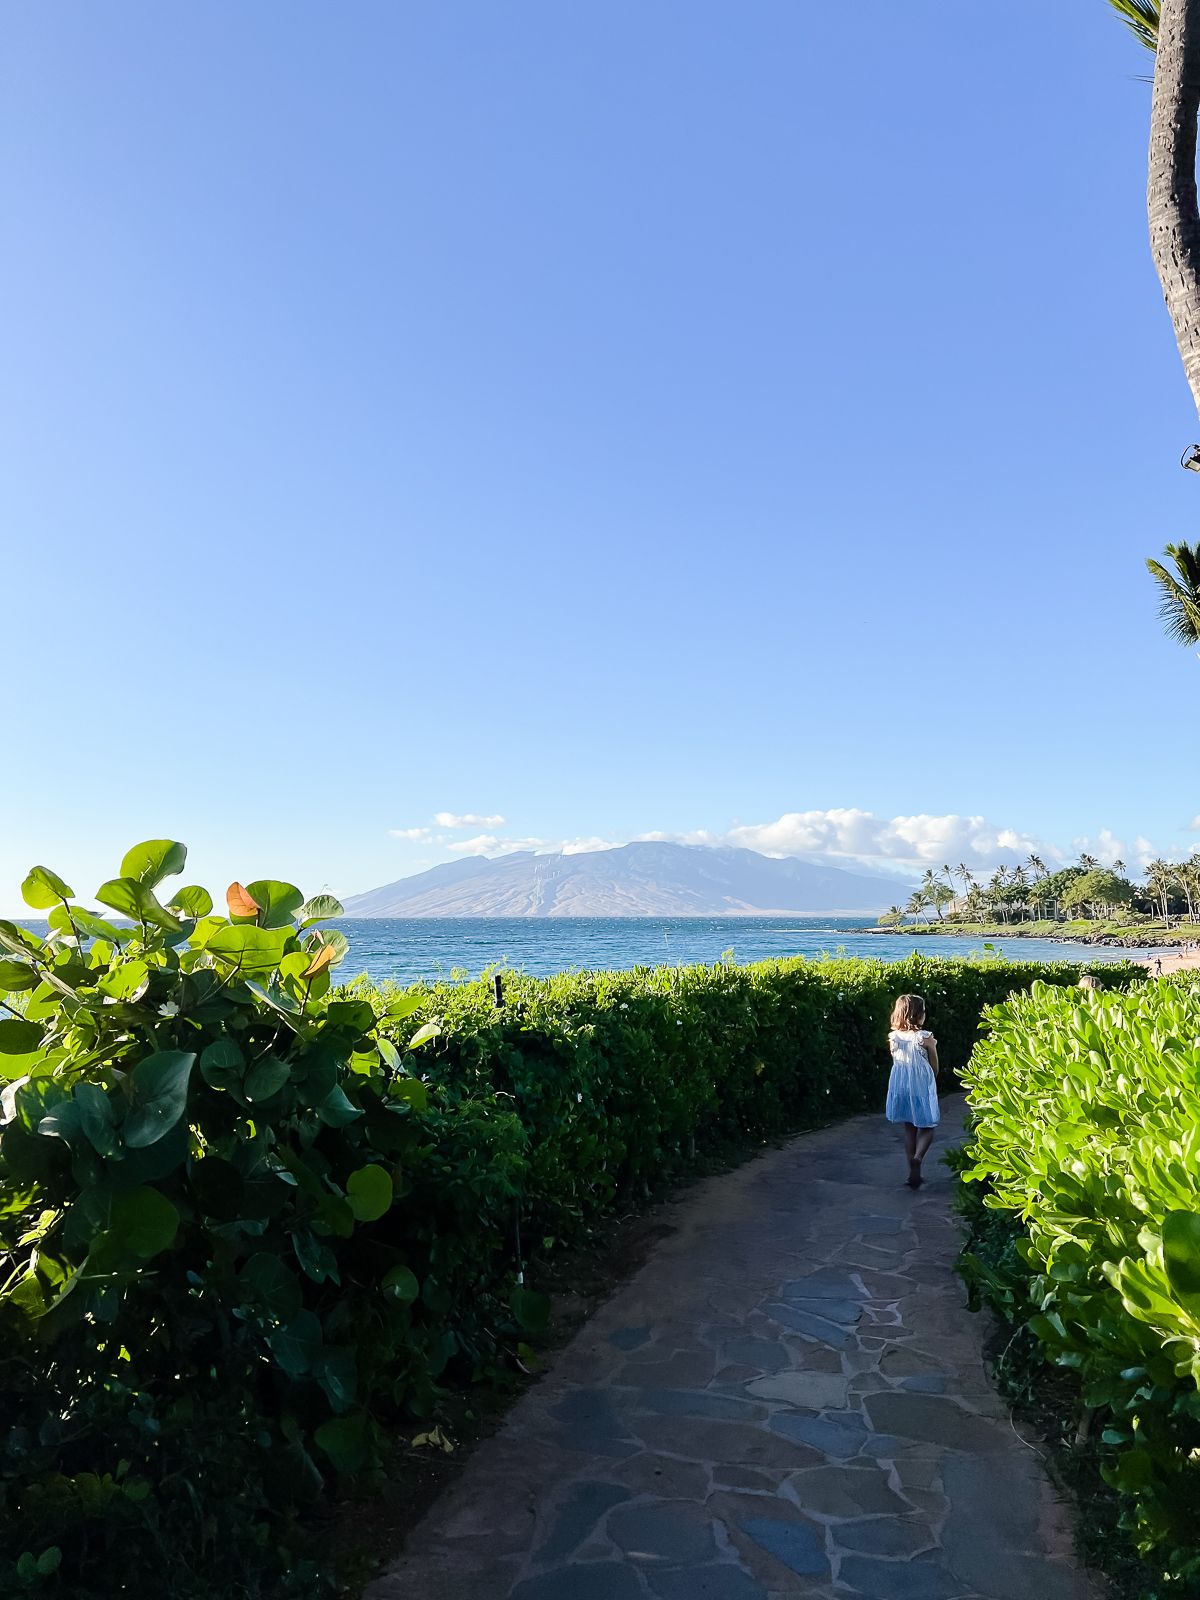 A little girl walking down a path with ocean and mountains in the background on Maui